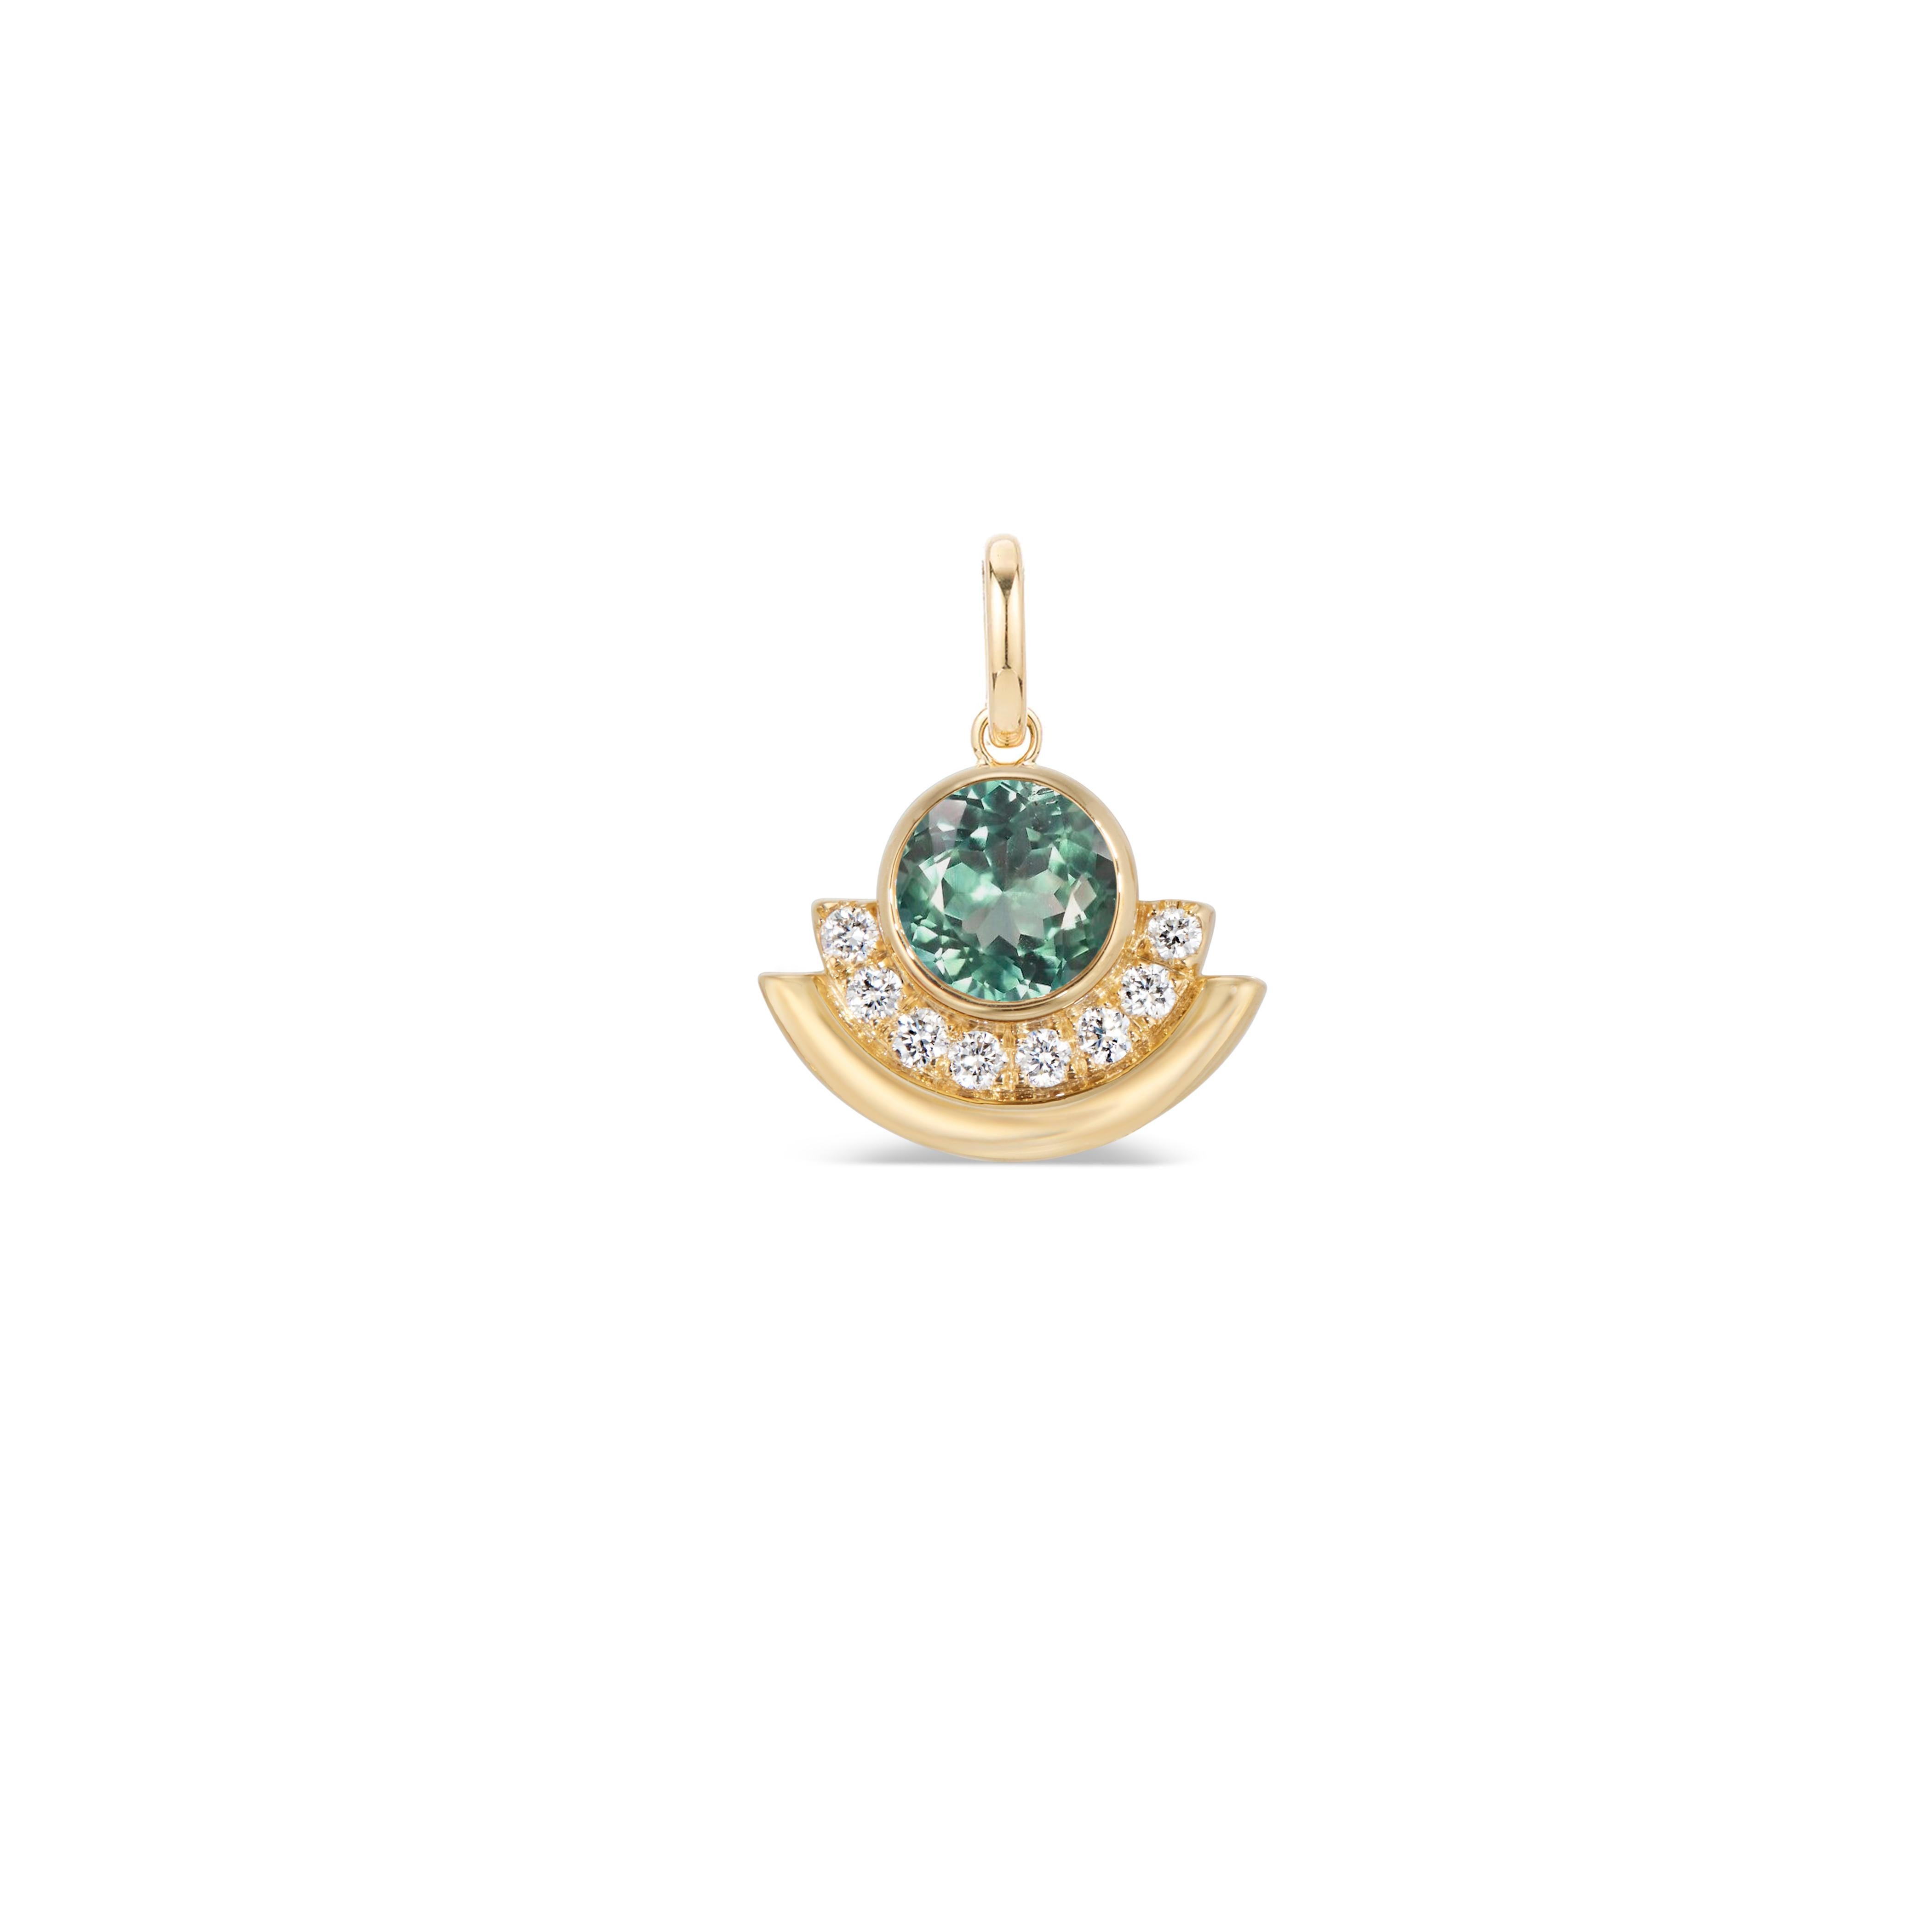 This architectural yet minimal arc shaped 14K gold charm is ready to slip onto your favorite chain. It features a large bezel set green tourmaline accented with modern banded detail and diamond pave. Its petite size makes it suitable for everyday